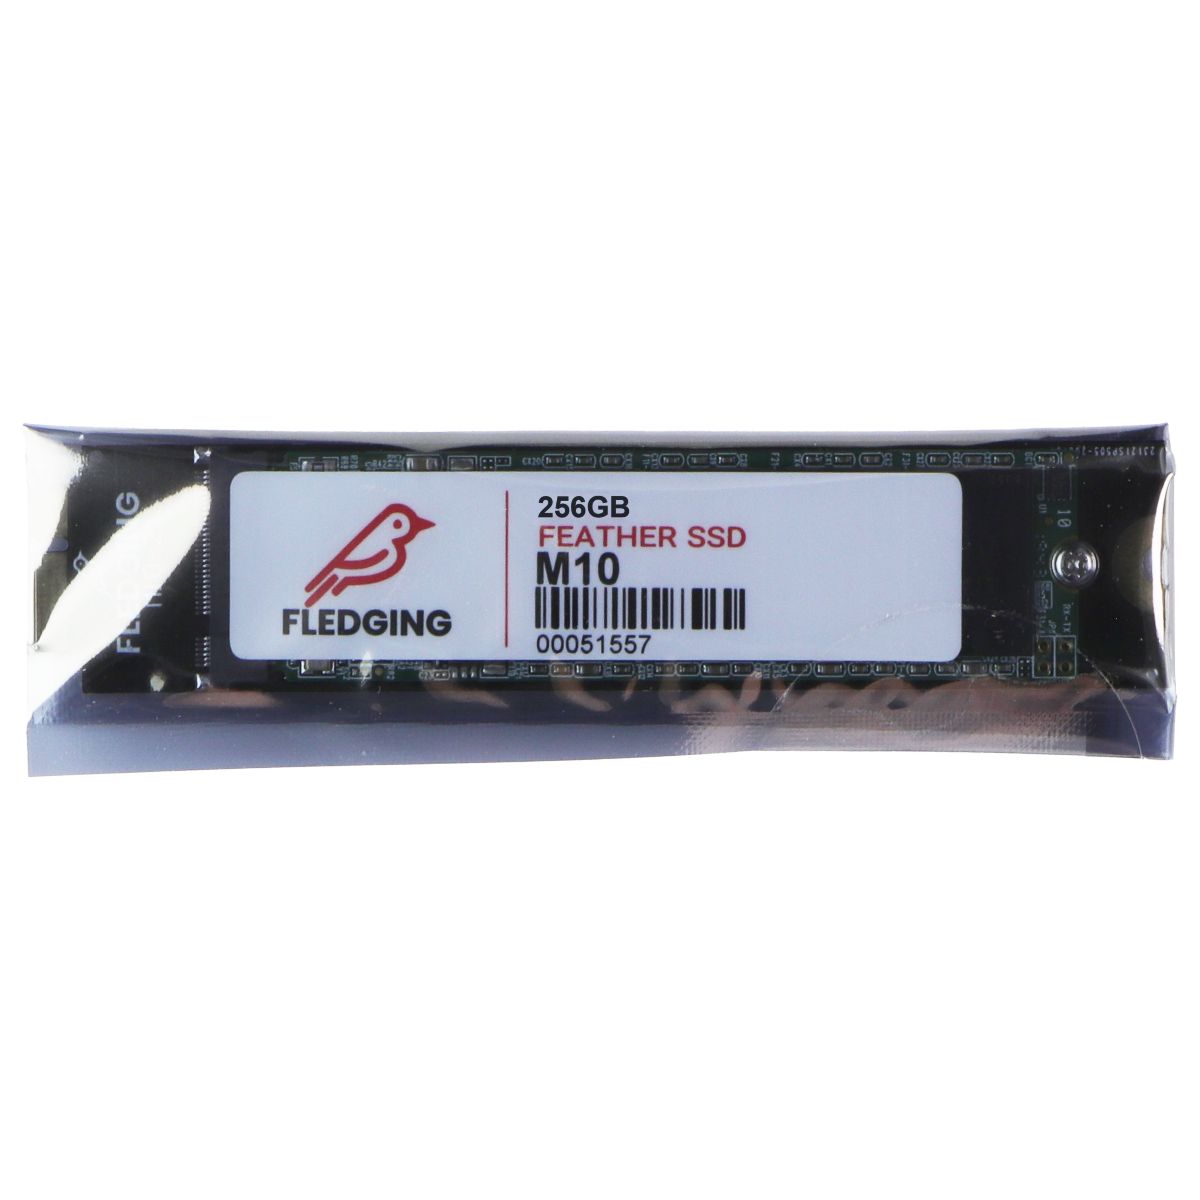 Fledging 256GB Feather M10 SATA 3 SSD Upgrade for MacBook Air 2010 - 2011 Digital Storage - Solid State Drives Fledging    - Simple Cell Bulk Wholesale Pricing - USA Seller